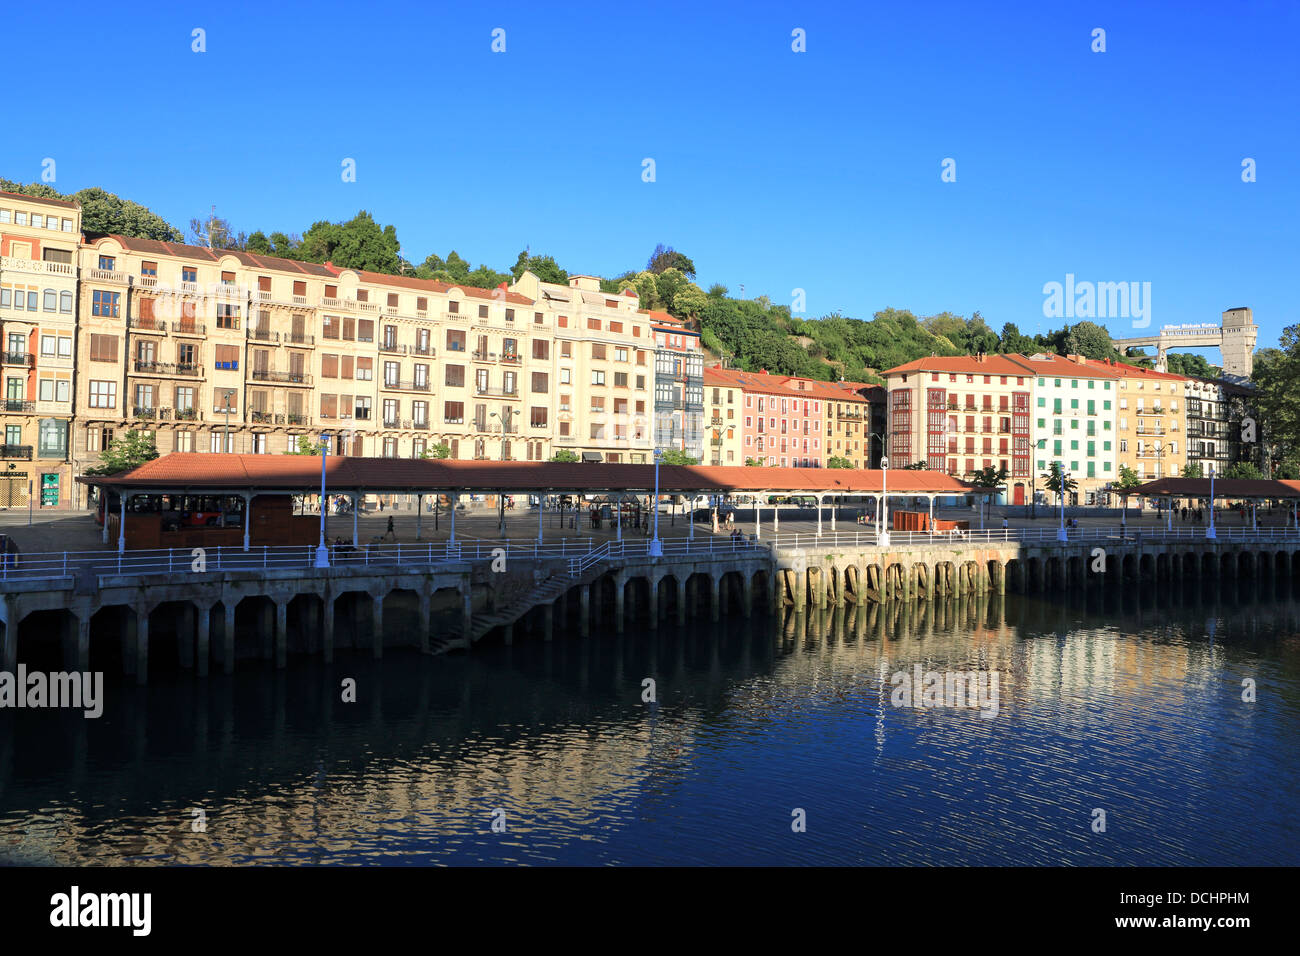 Casco Viejo Bilbao High Resolution Stock Photography and Images - Alamy